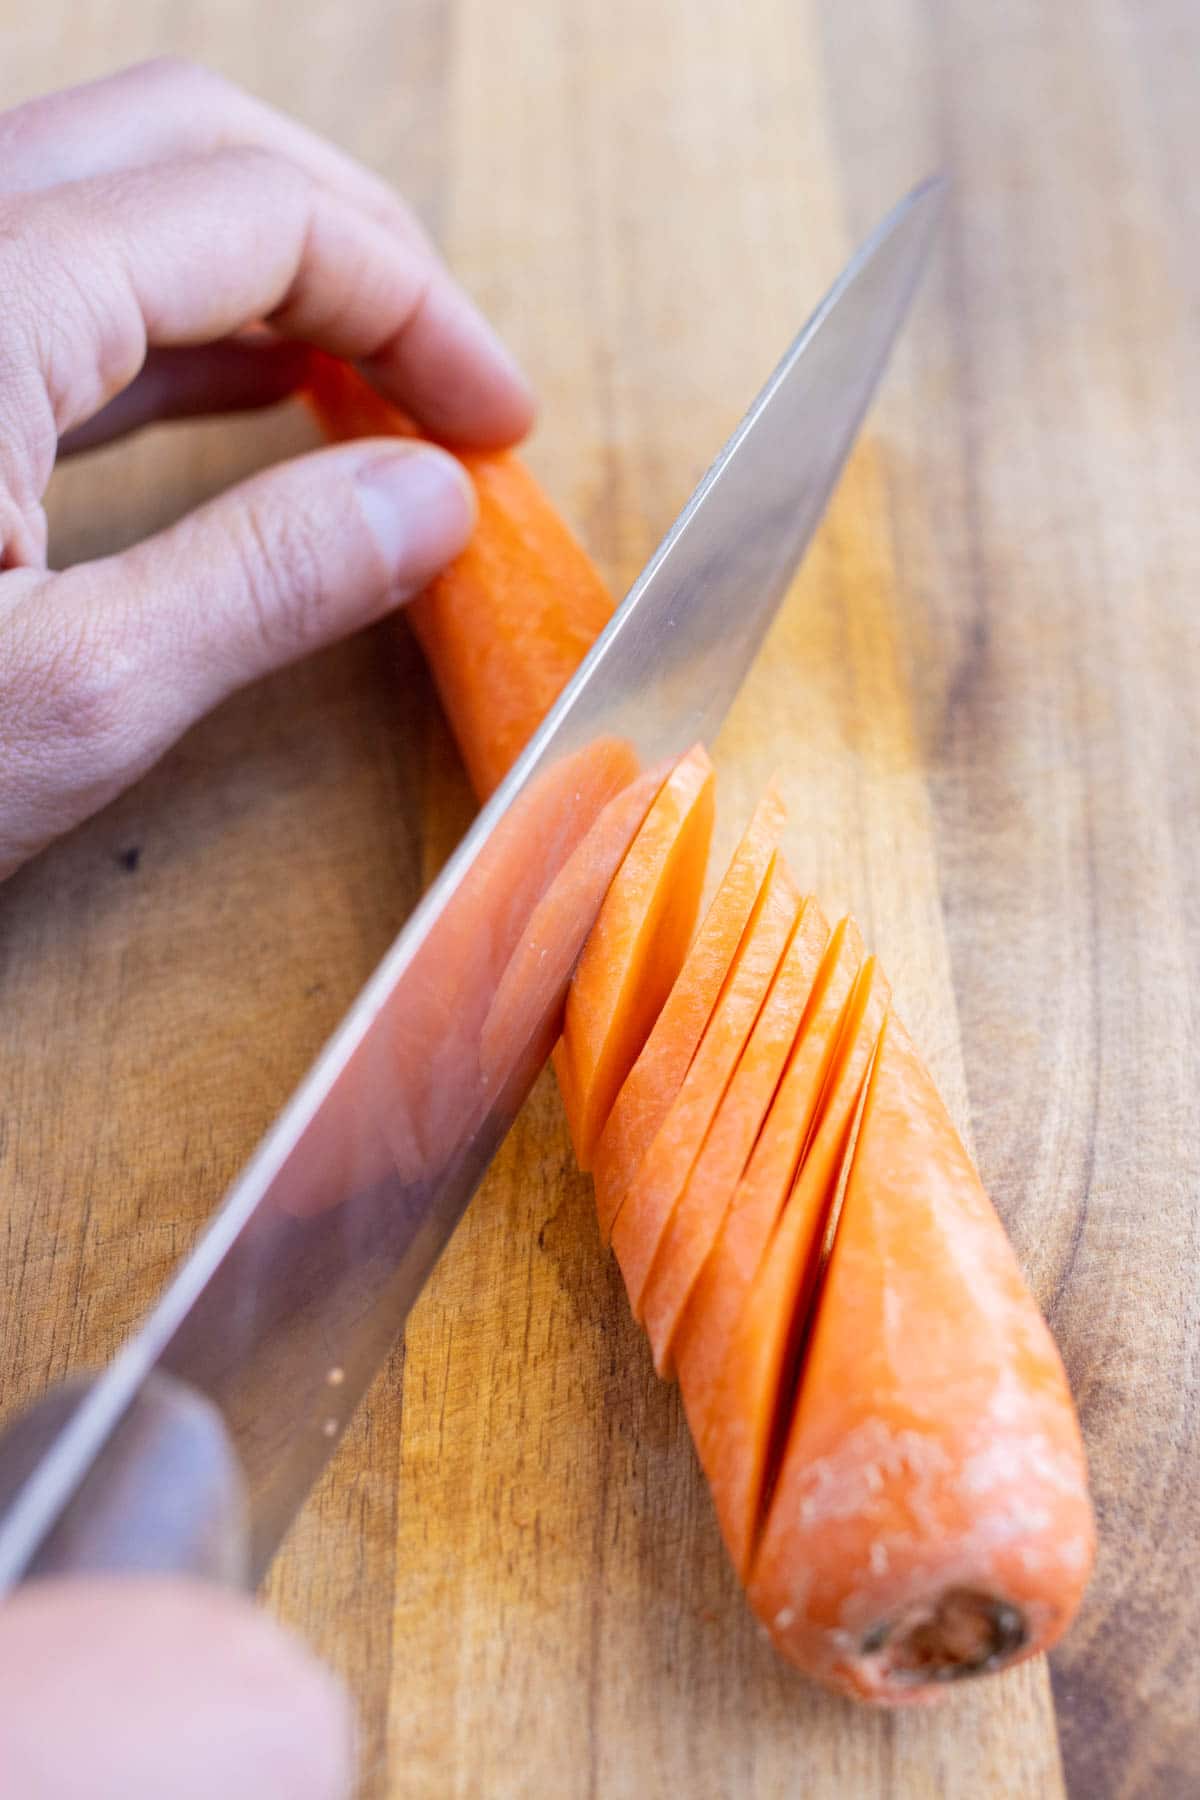 Carrots are cut at an angle before cutting into strips.